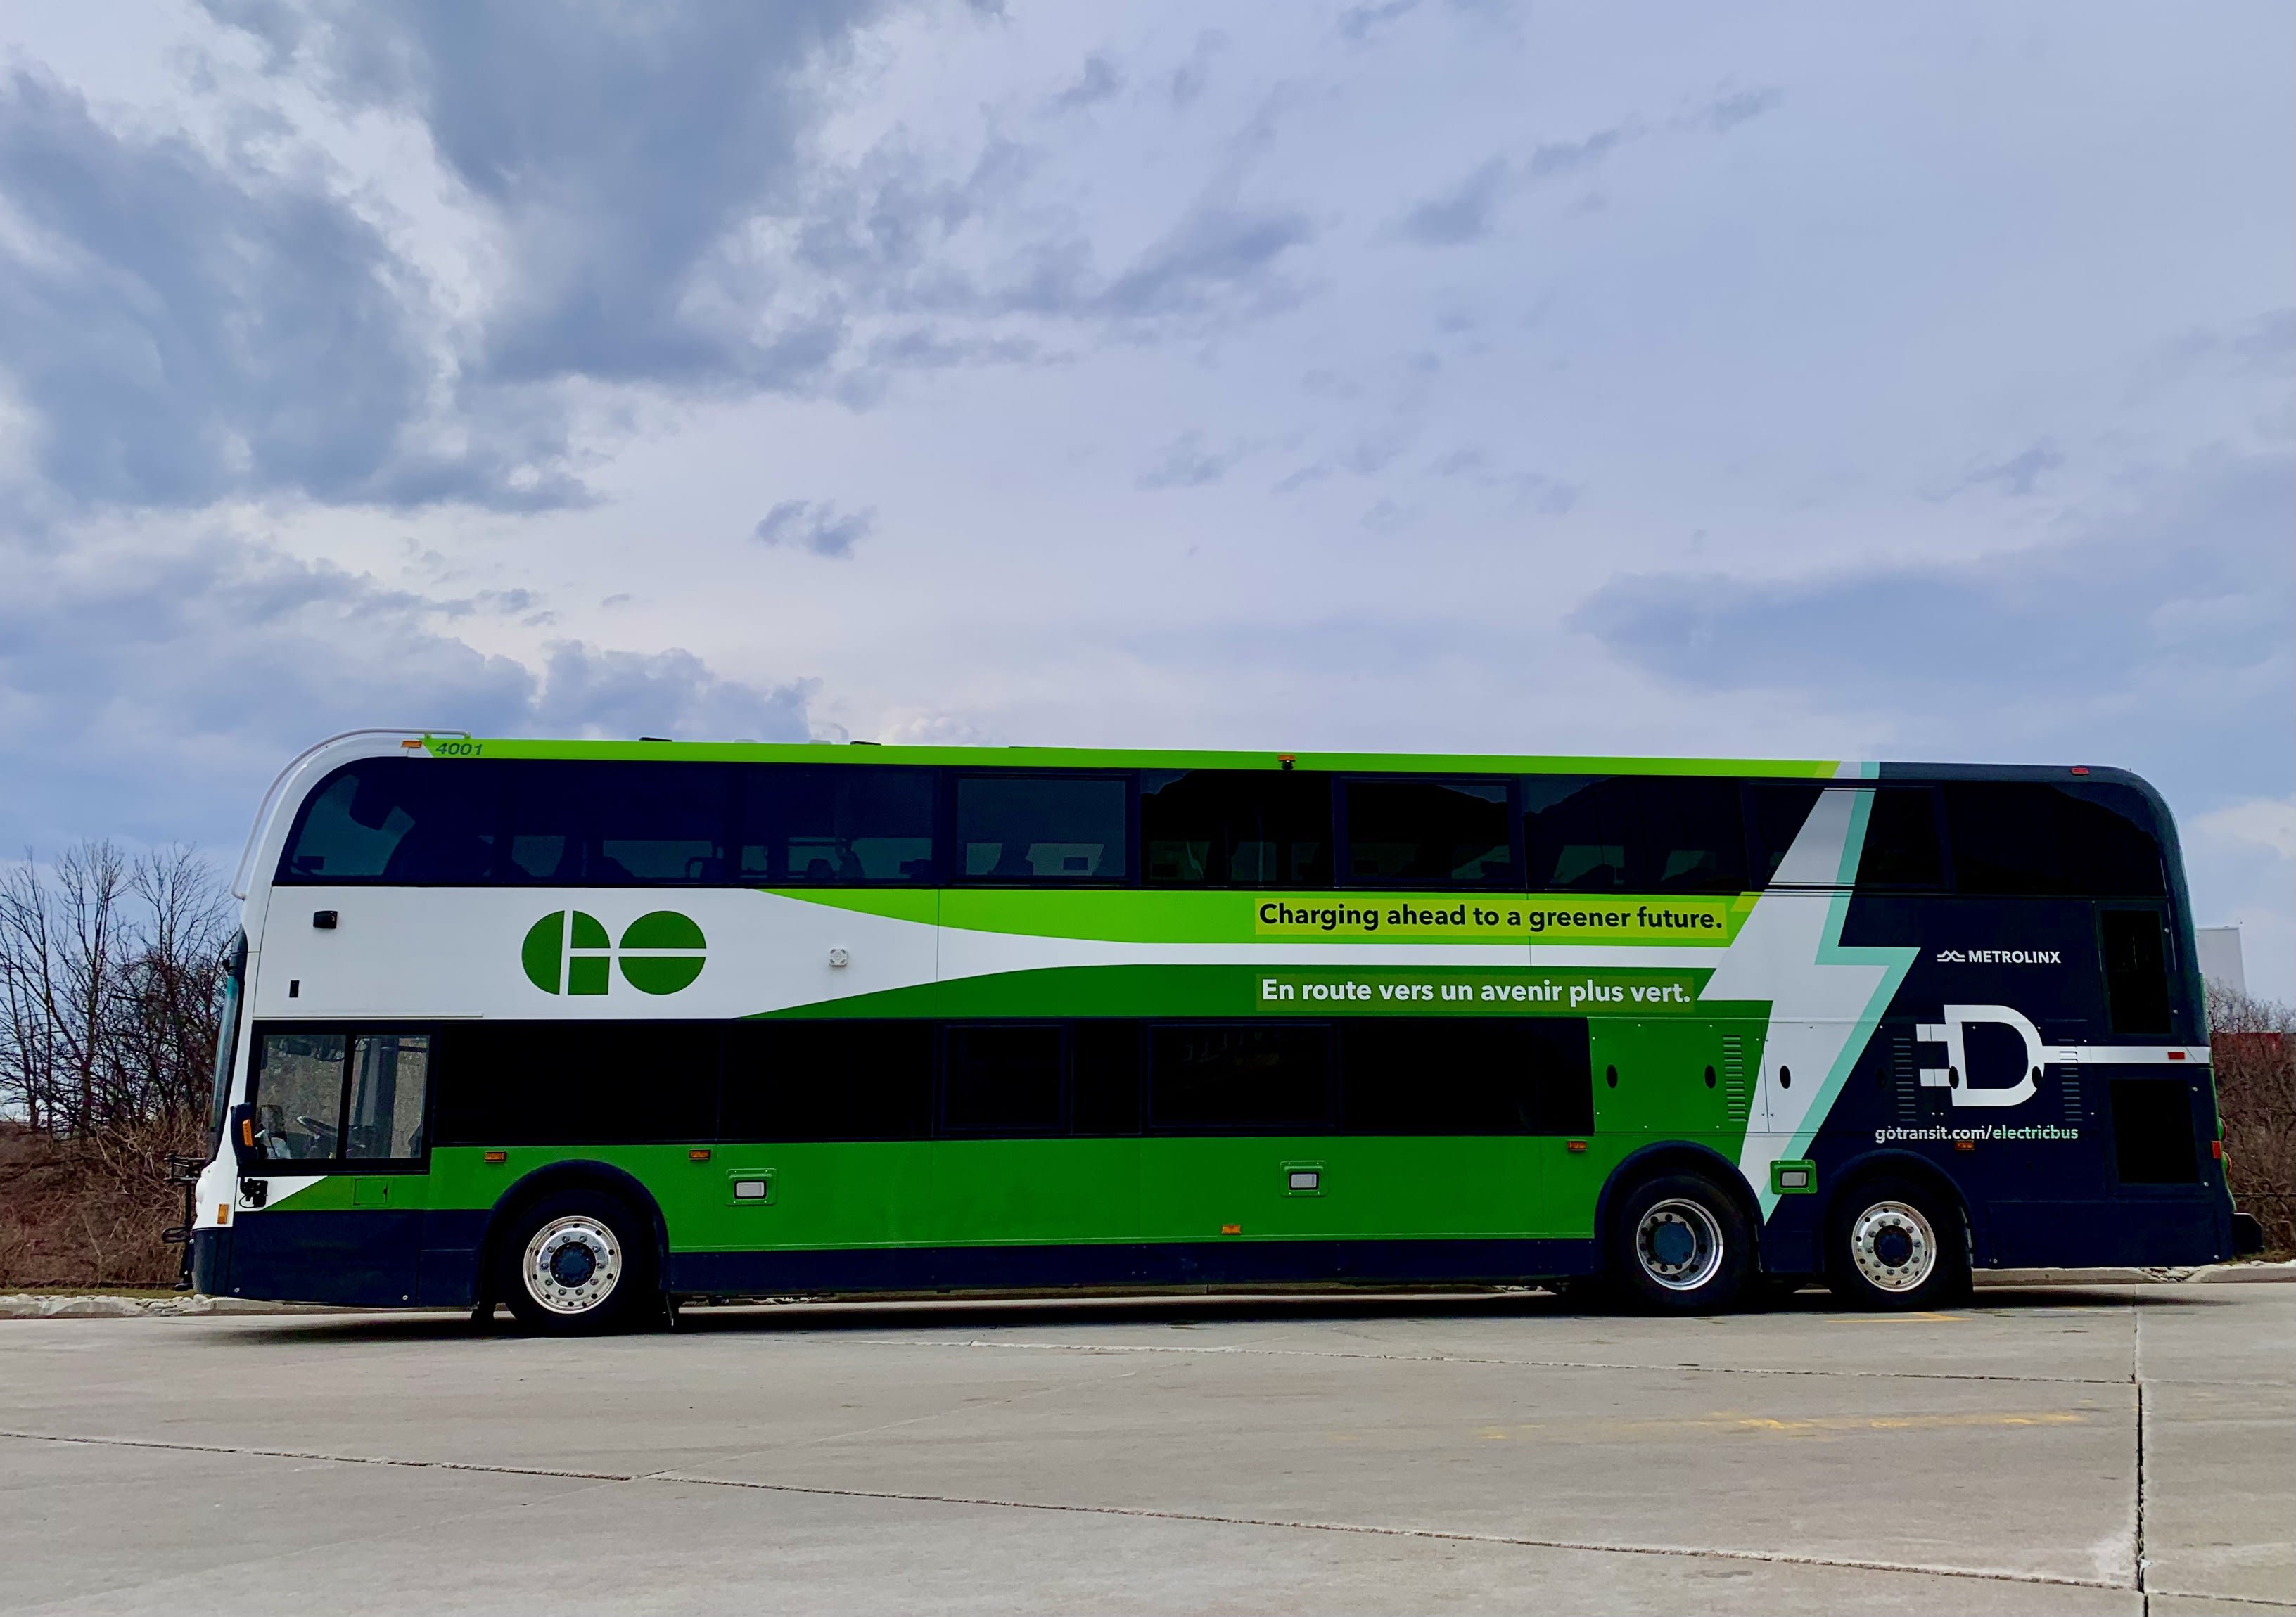 Here's a look at our new electric-powered GO buses